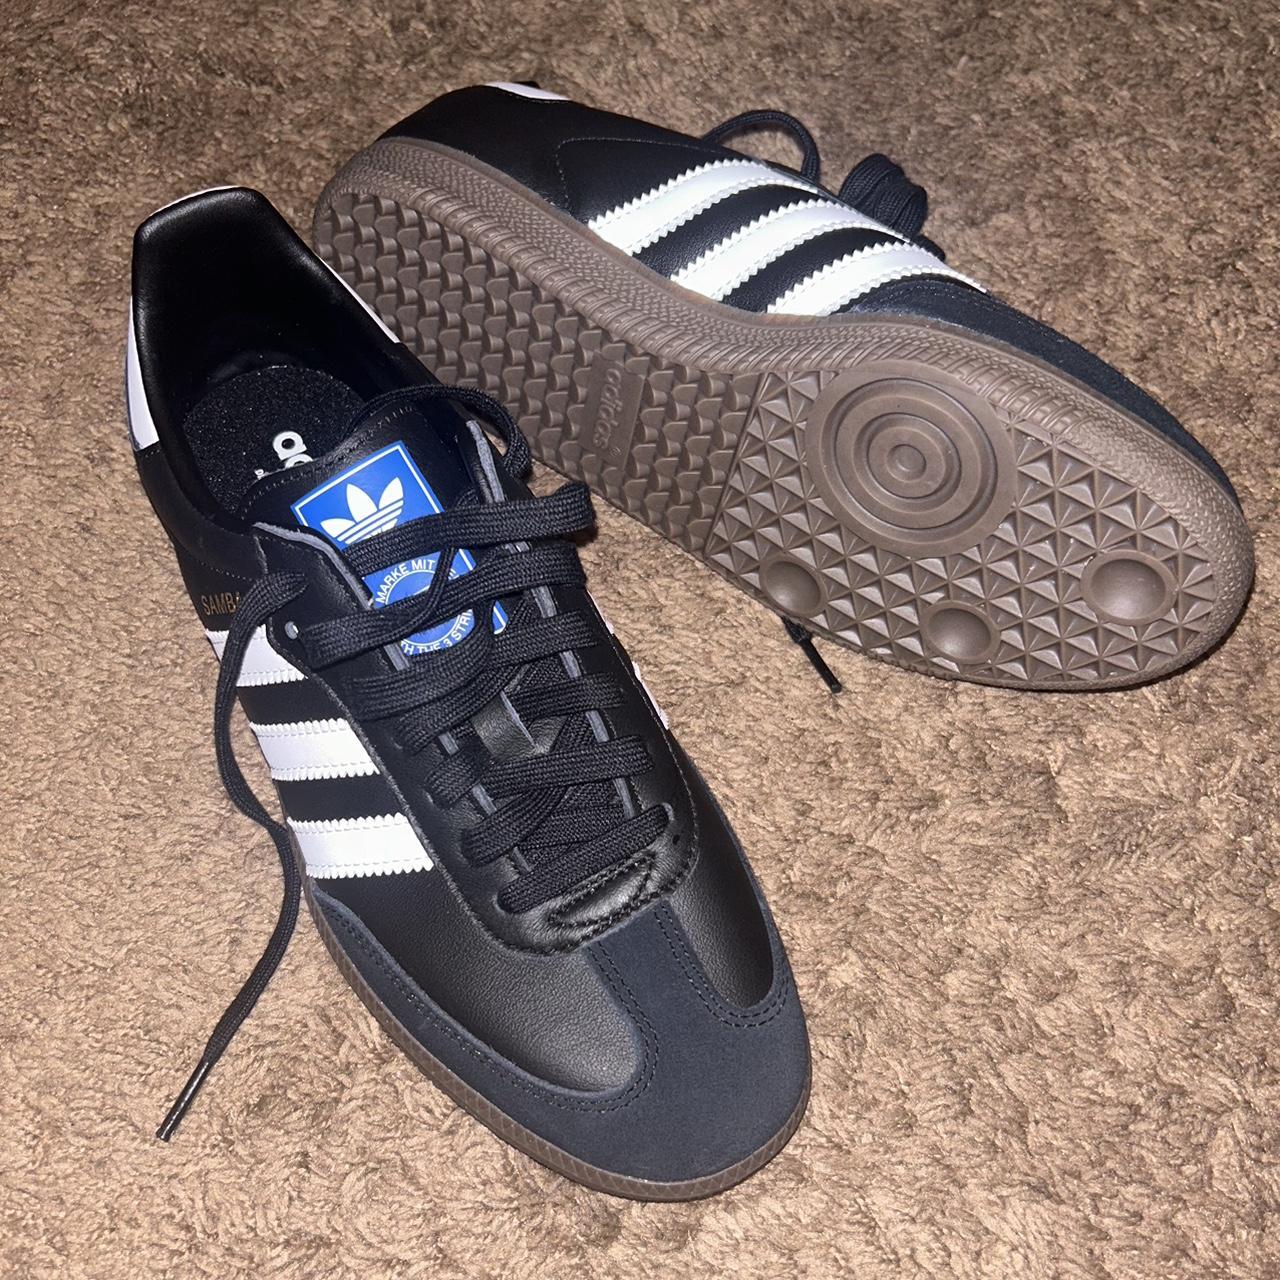 Adidas Men's Black and White Trainers (2)